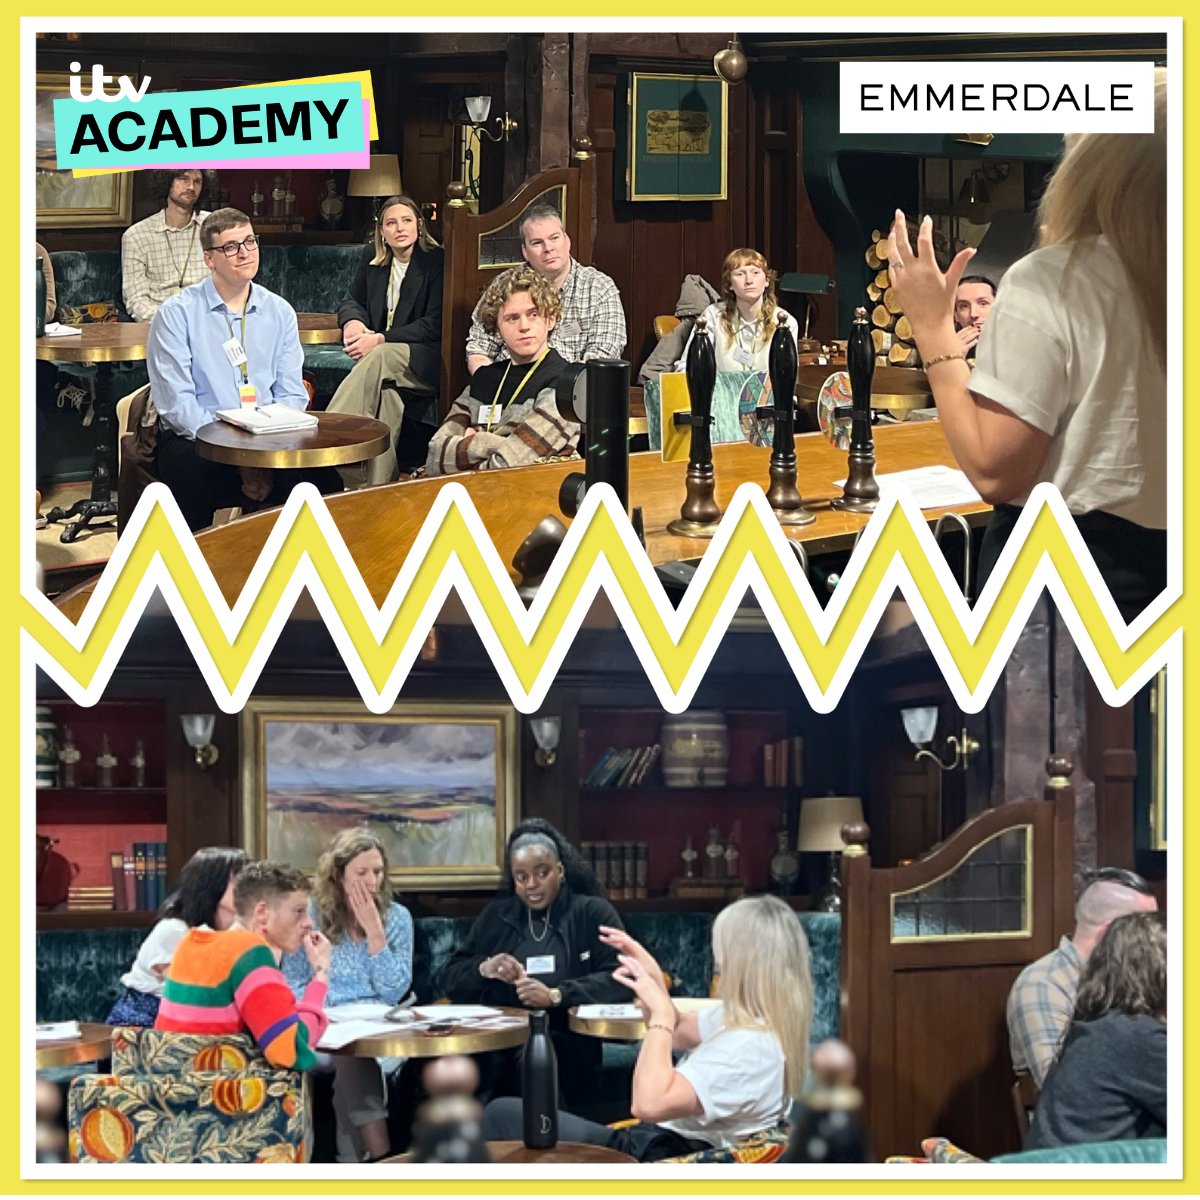 Last week, we held an assessment day for our Assistant Storyliner role at @emmerdale✍🎥
The room was wool-packed with talent 👏

#ITVAcademy #BePartofIt #Emmerdale #ITV